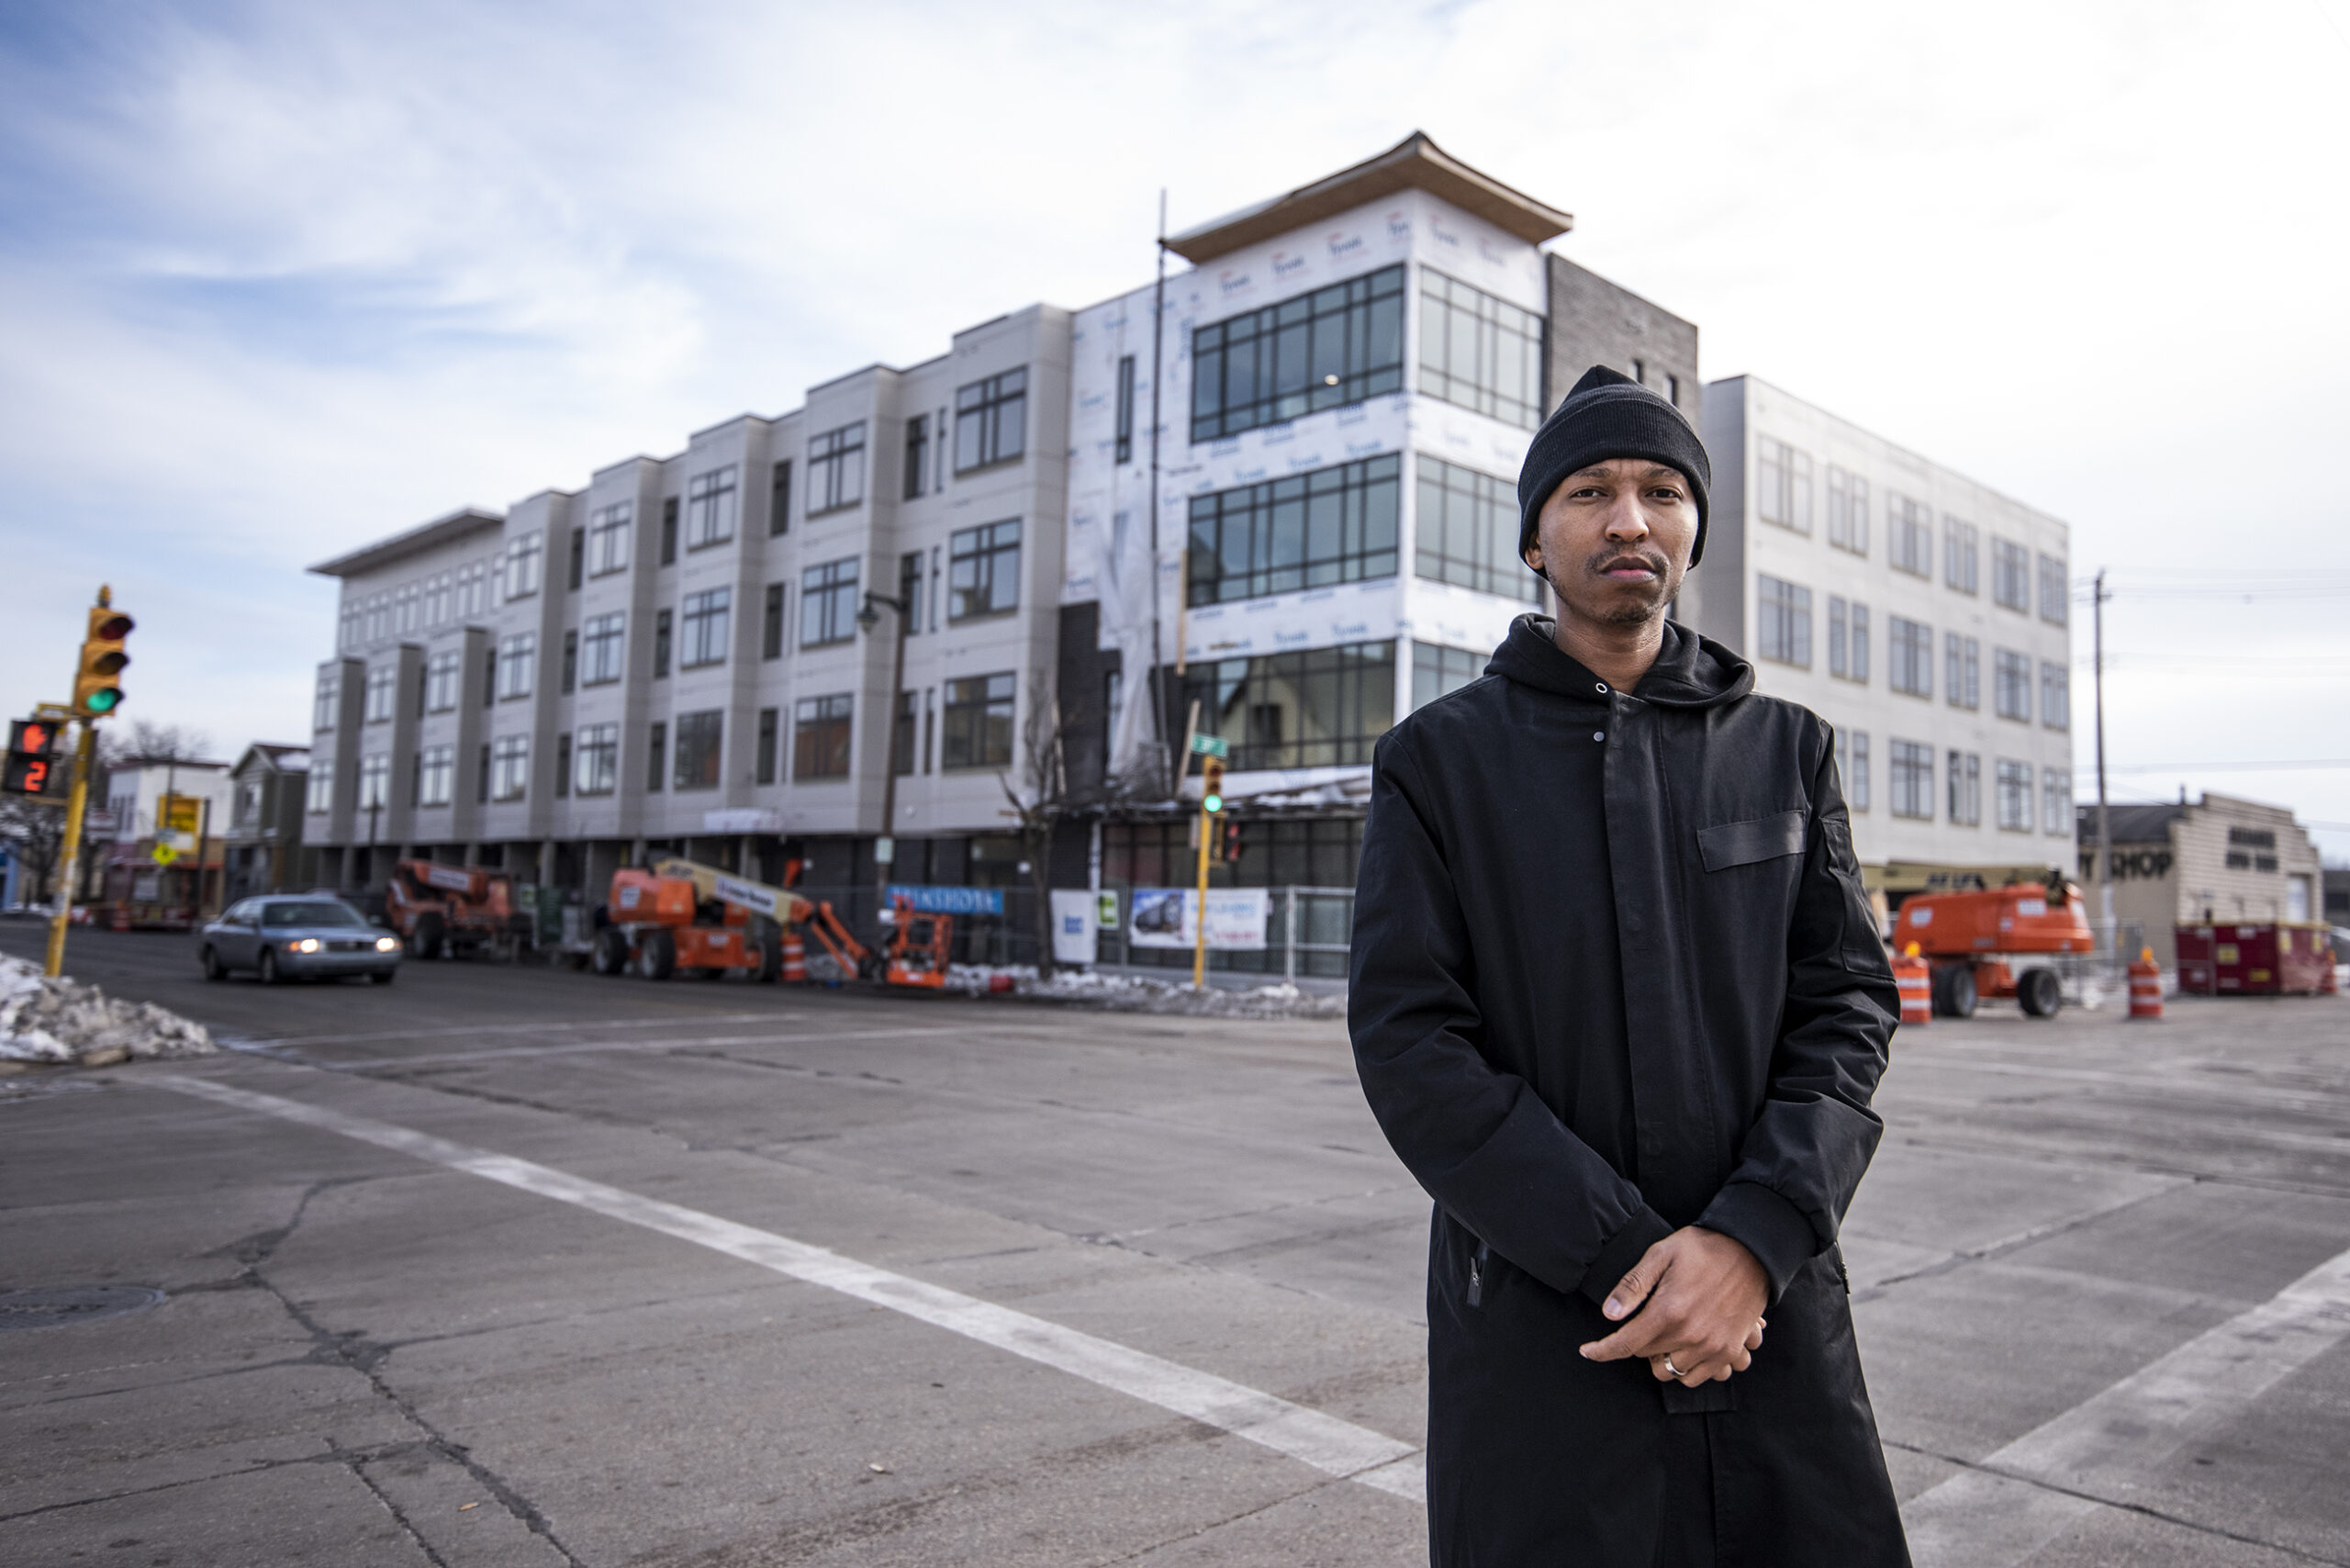 A man in a black coat stands in front of an apartment that is under construction, but mostly complete.